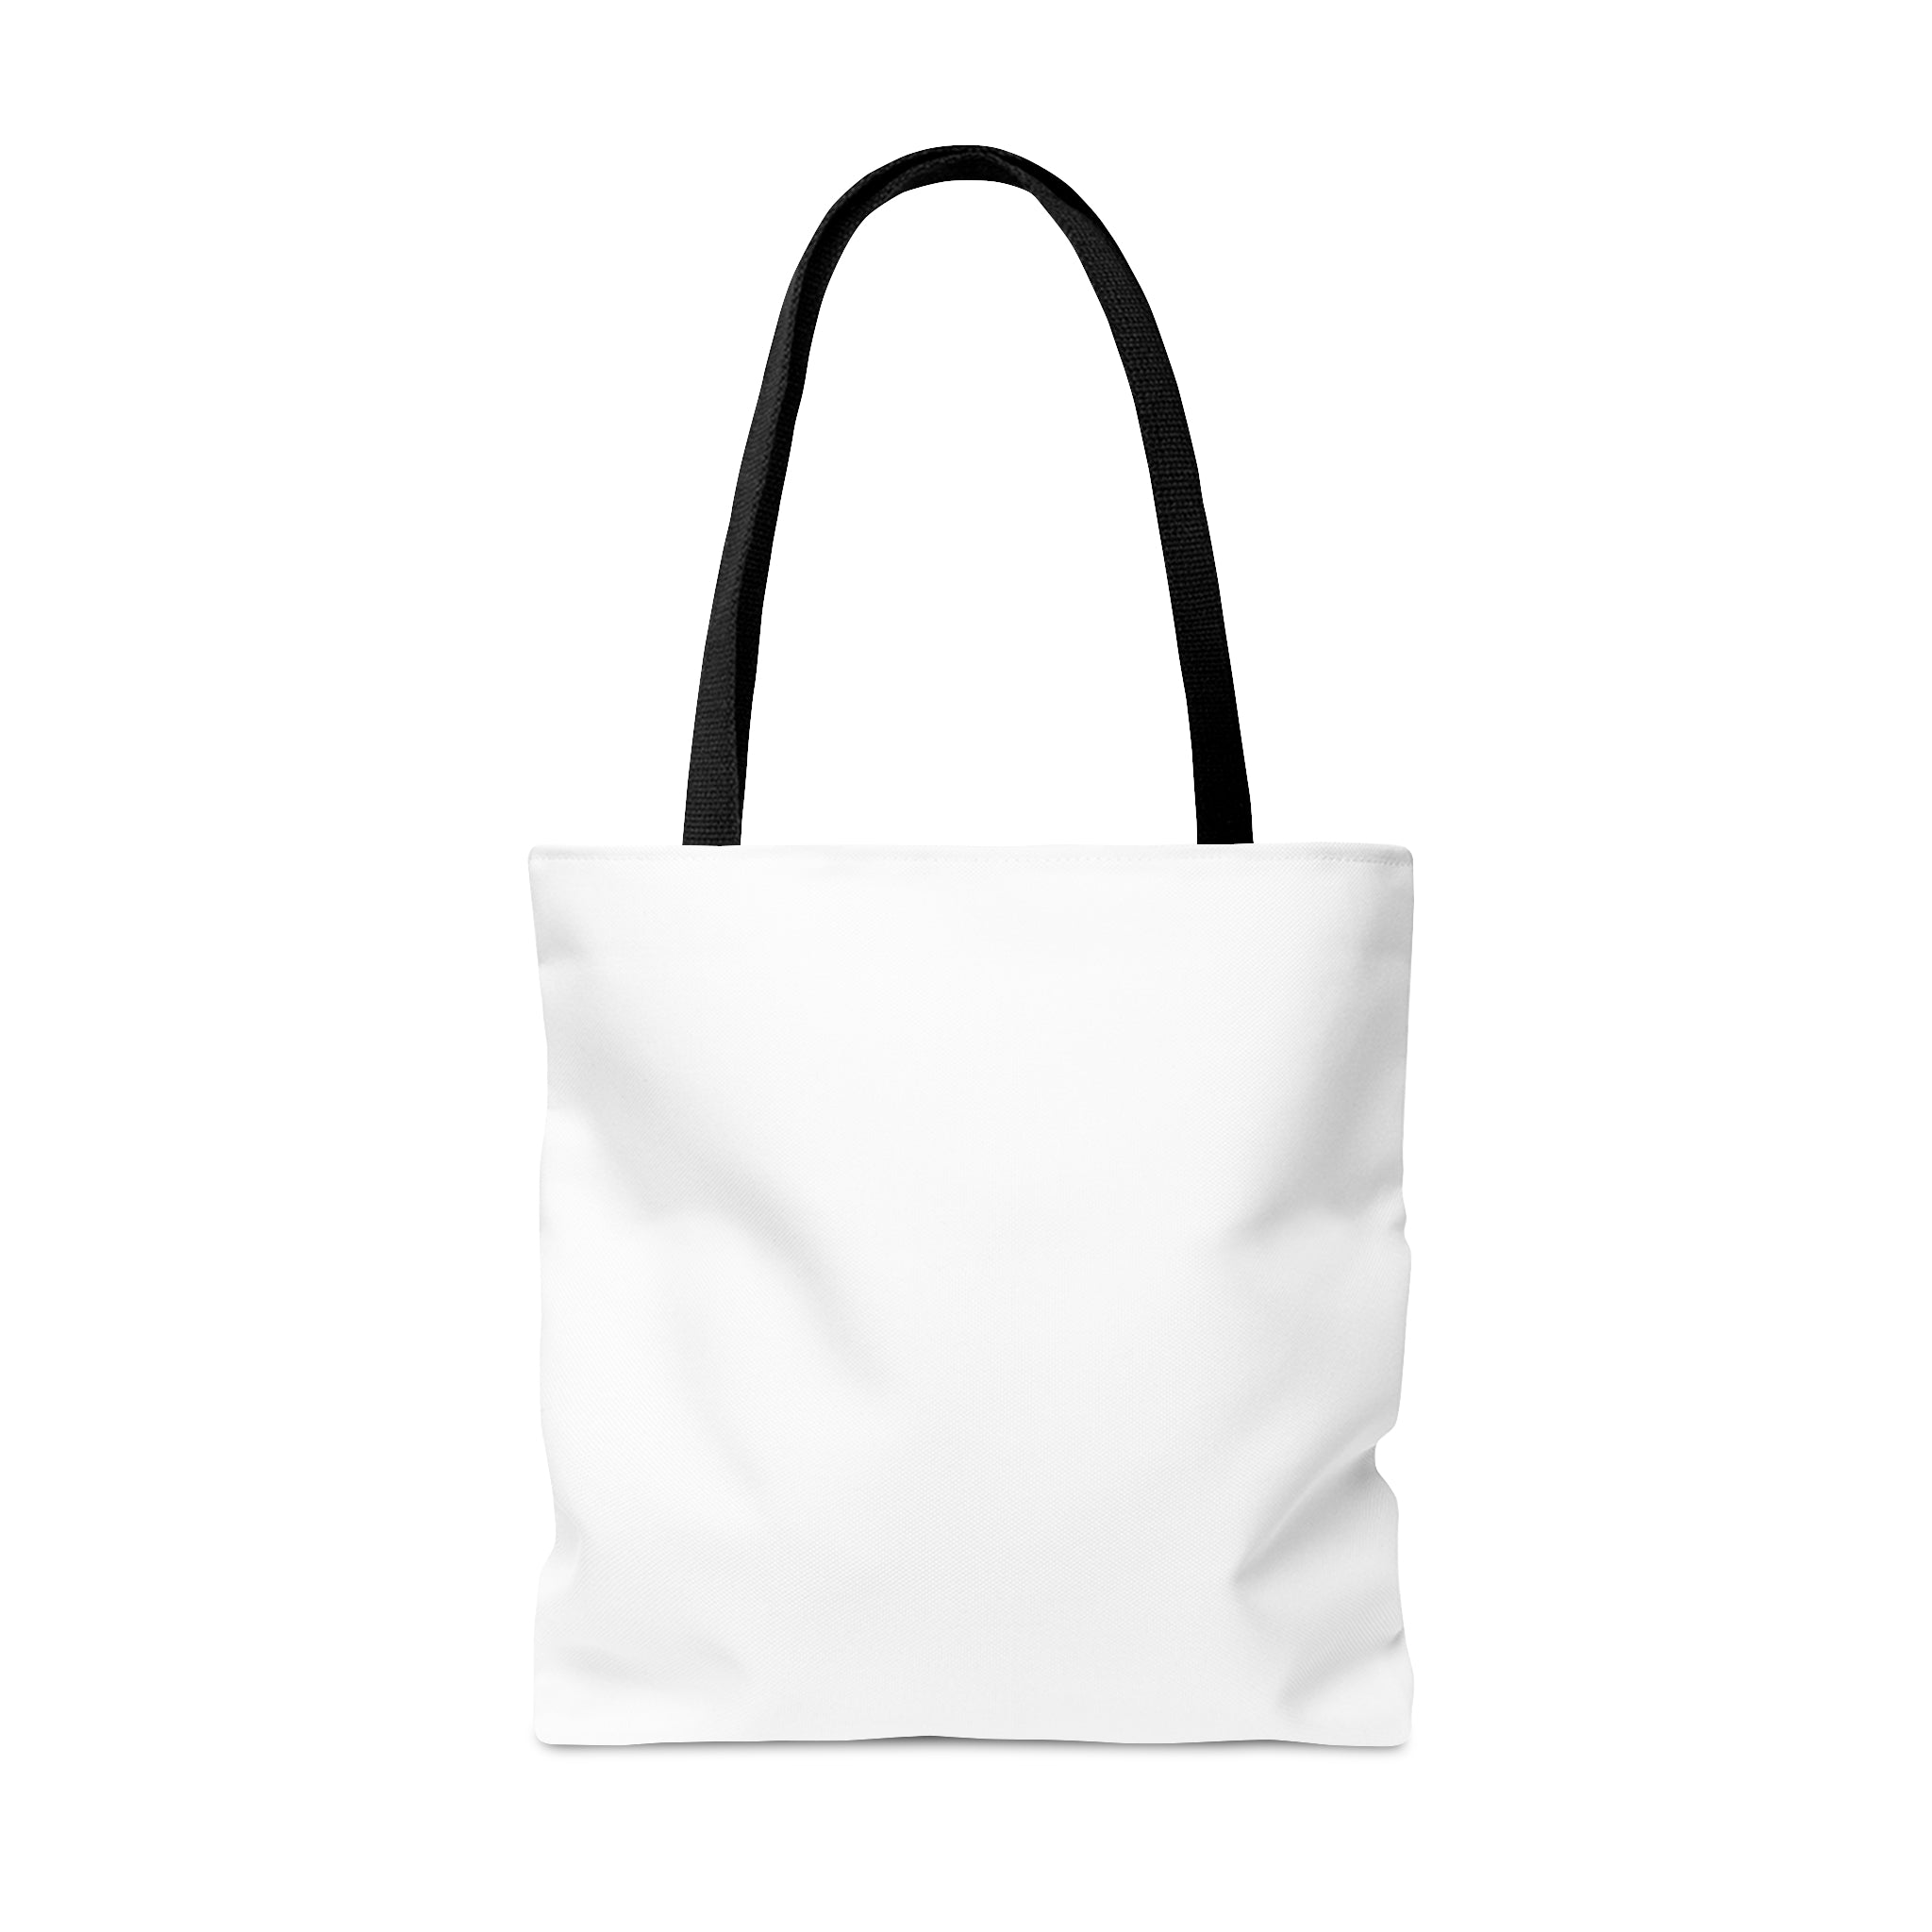 I will be her voice.. for now Mom tote, mom IEP tote